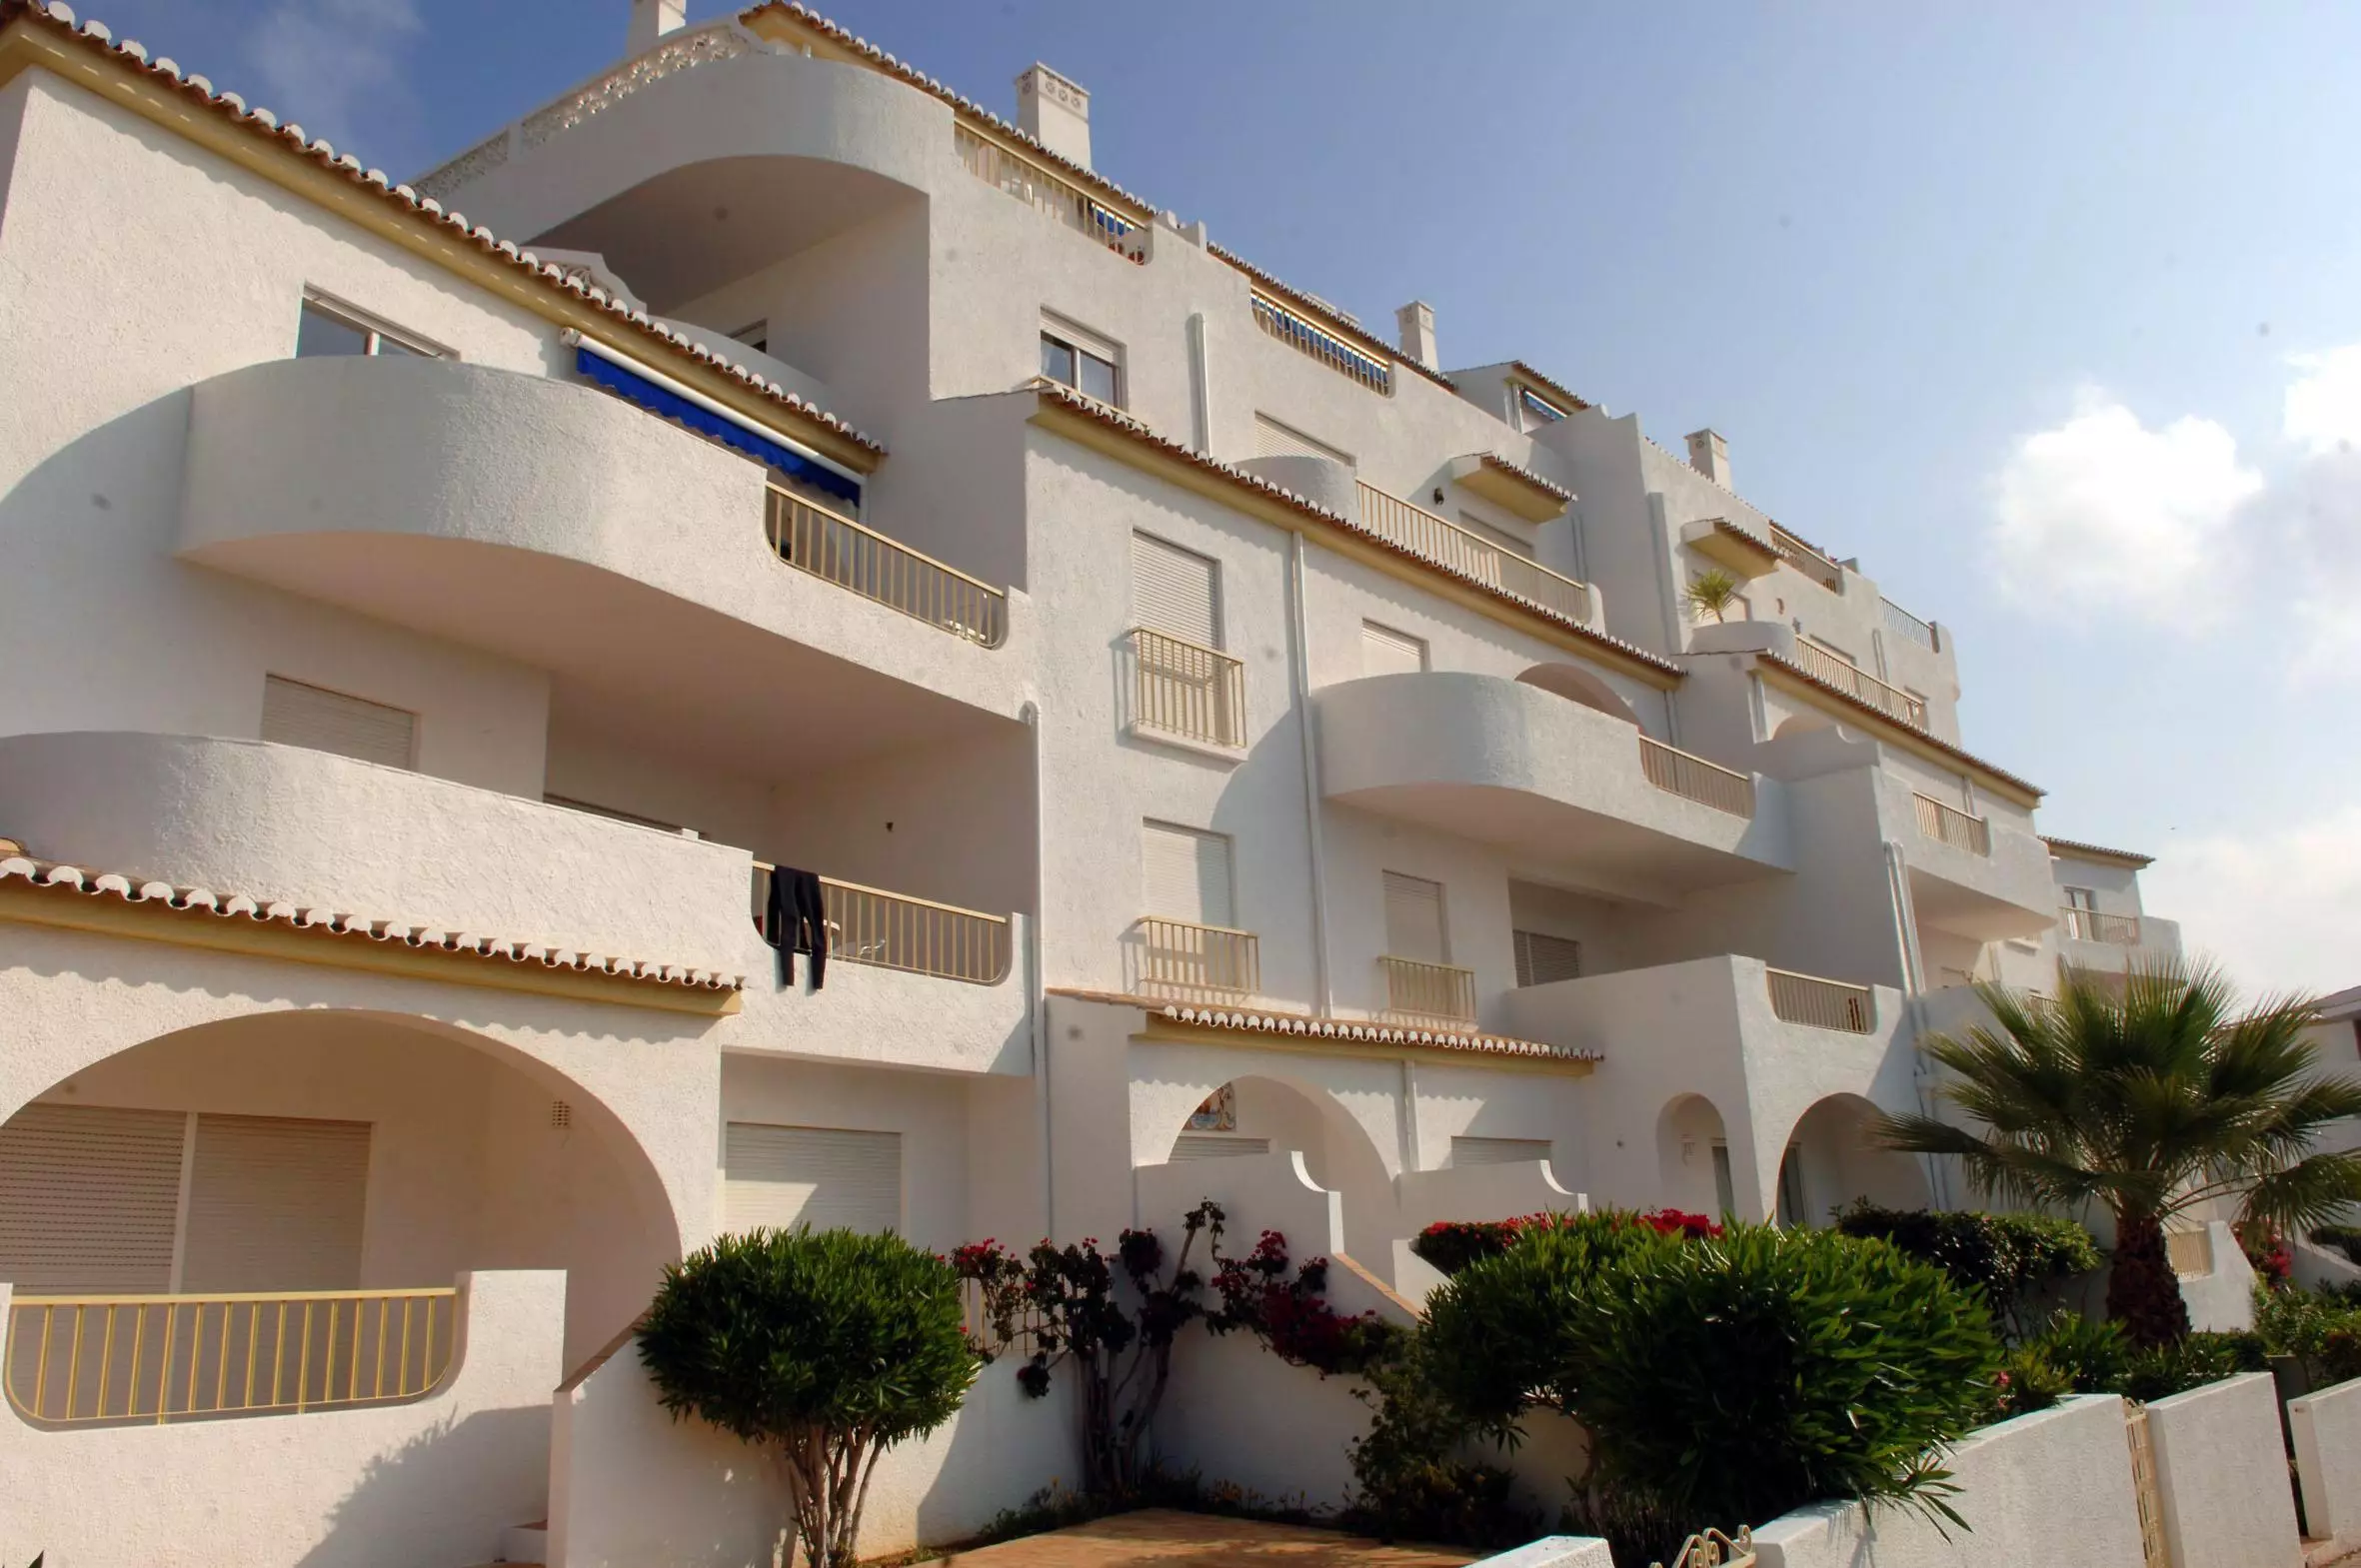 The apartments the McCann's stayed at in Praia de Luz.